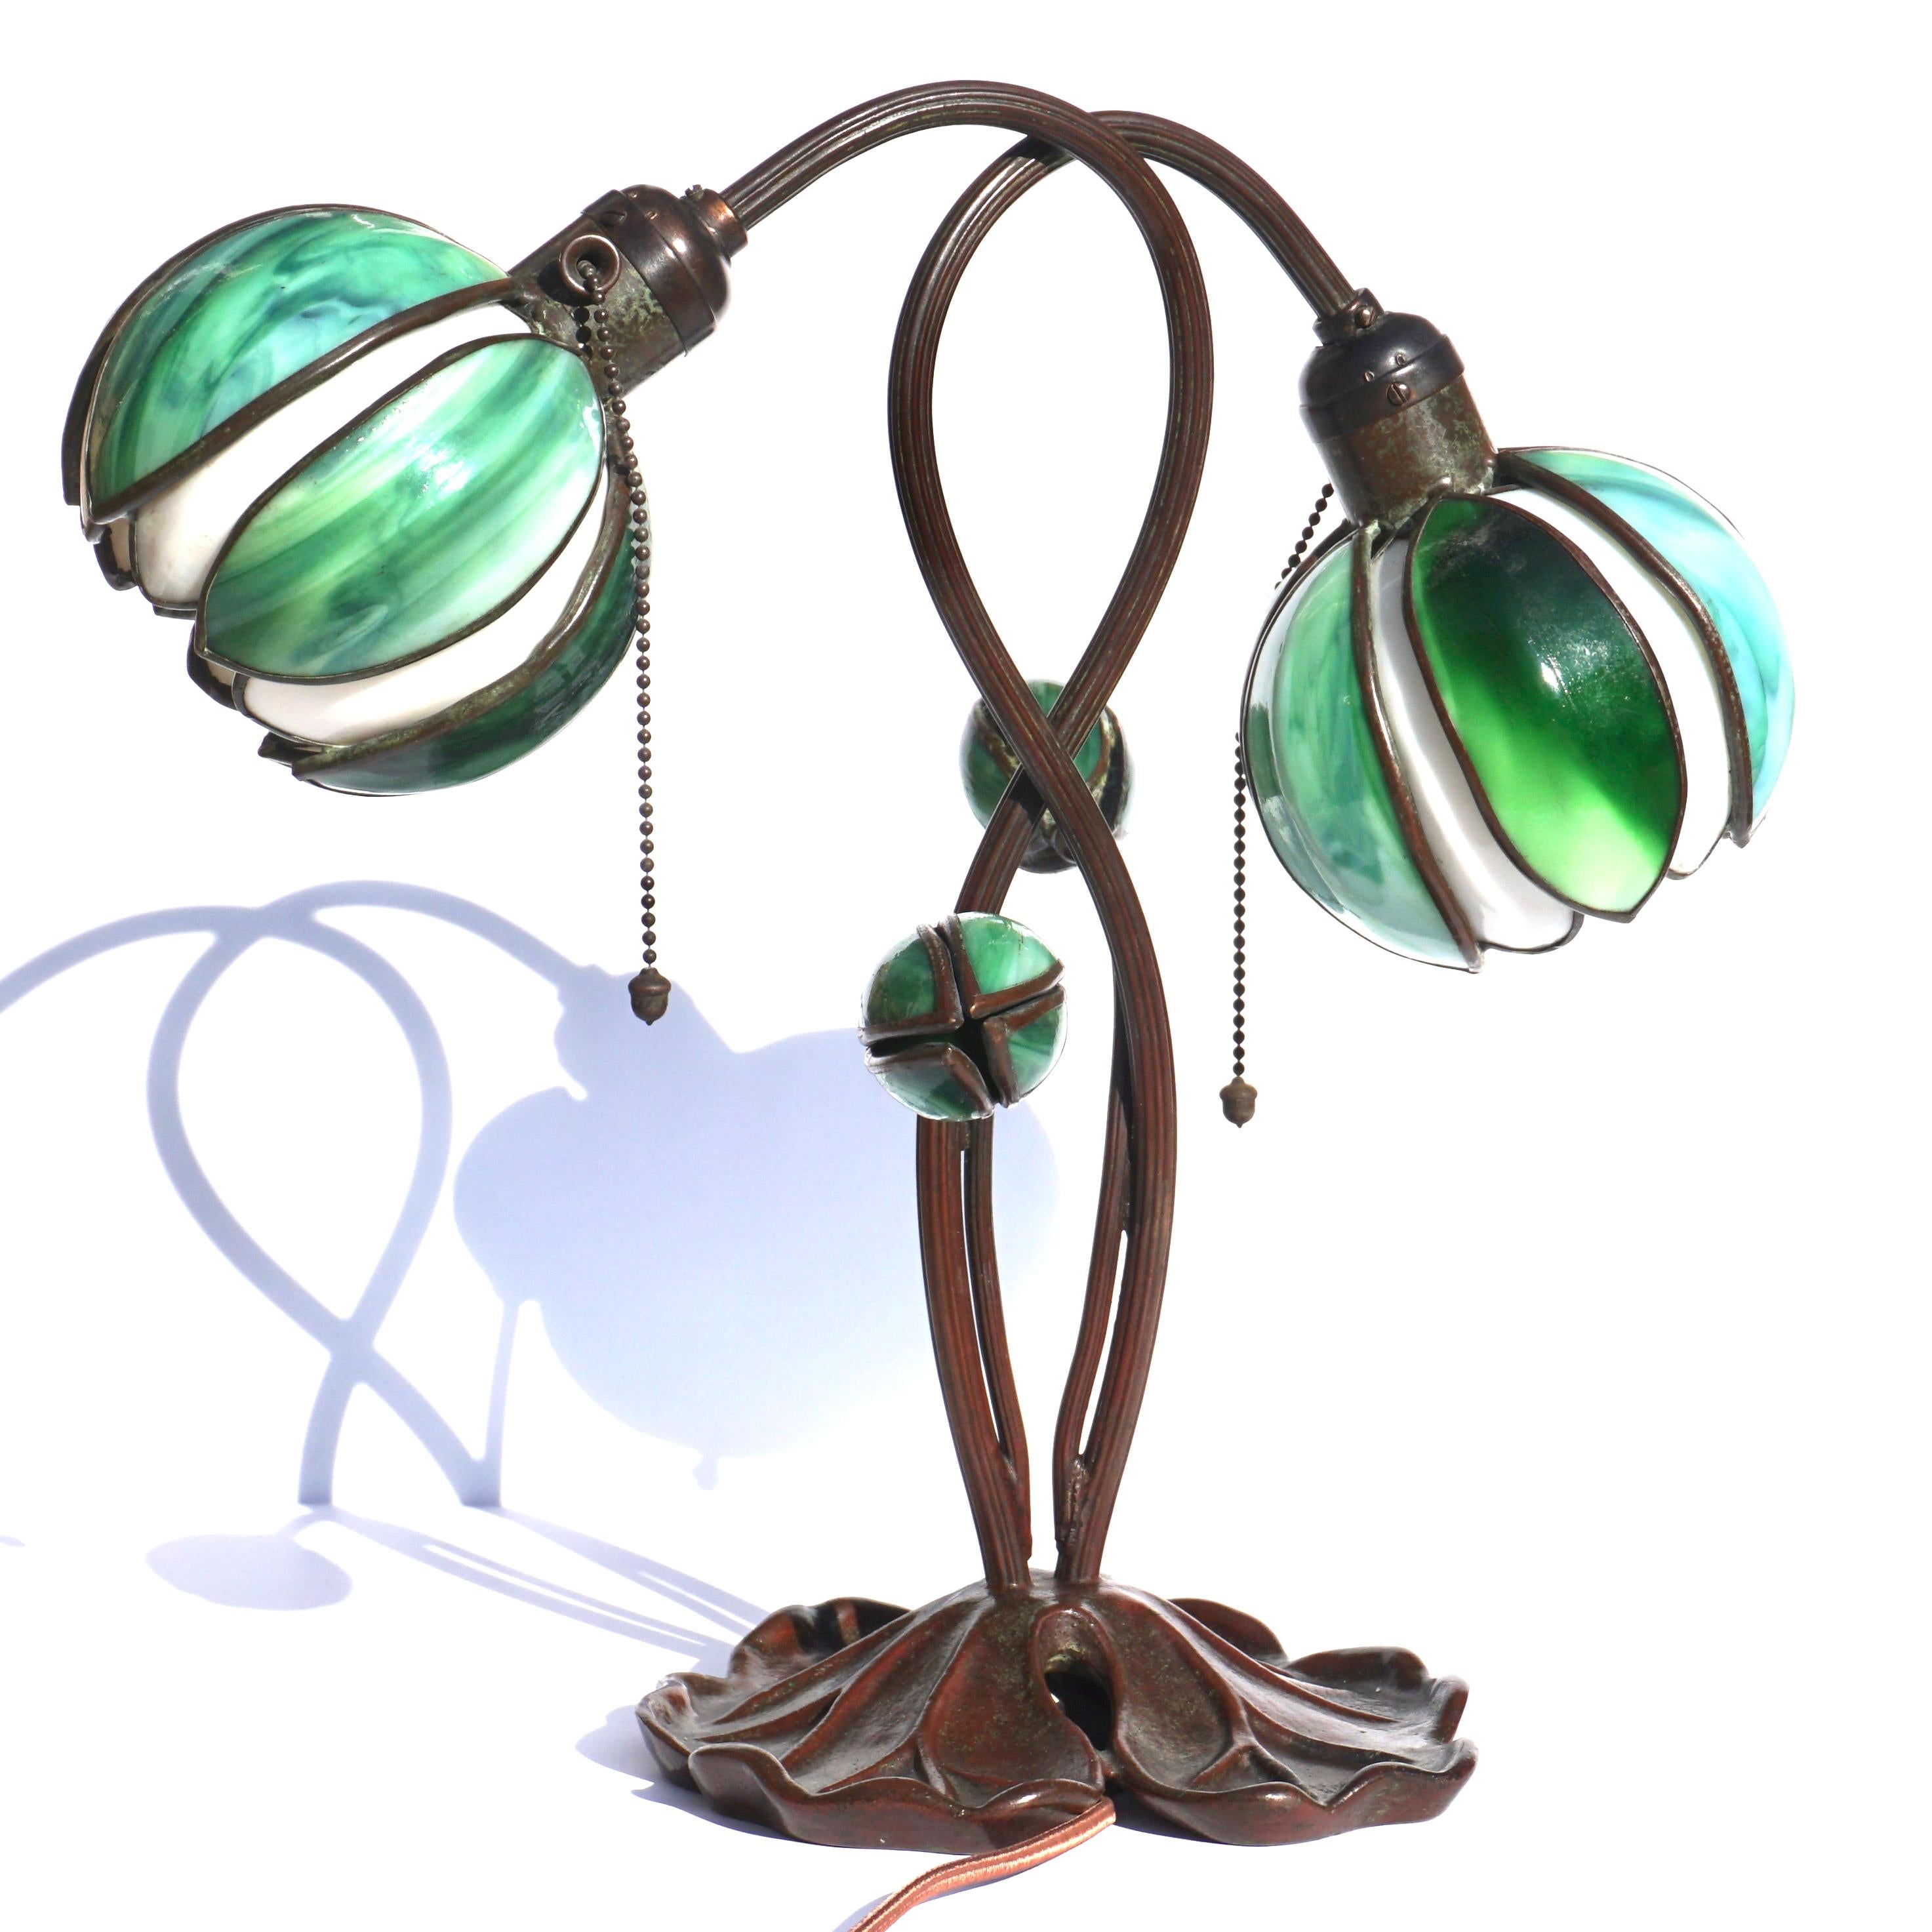 Handel Art Nouveau Two Light Lily Table Lamp.

A beautiful early 20th century two-light water lily lamp by Handel. The two water lily shades are comprised of white and green slag glass petals. The lamp is further decorated by two flowers buds made